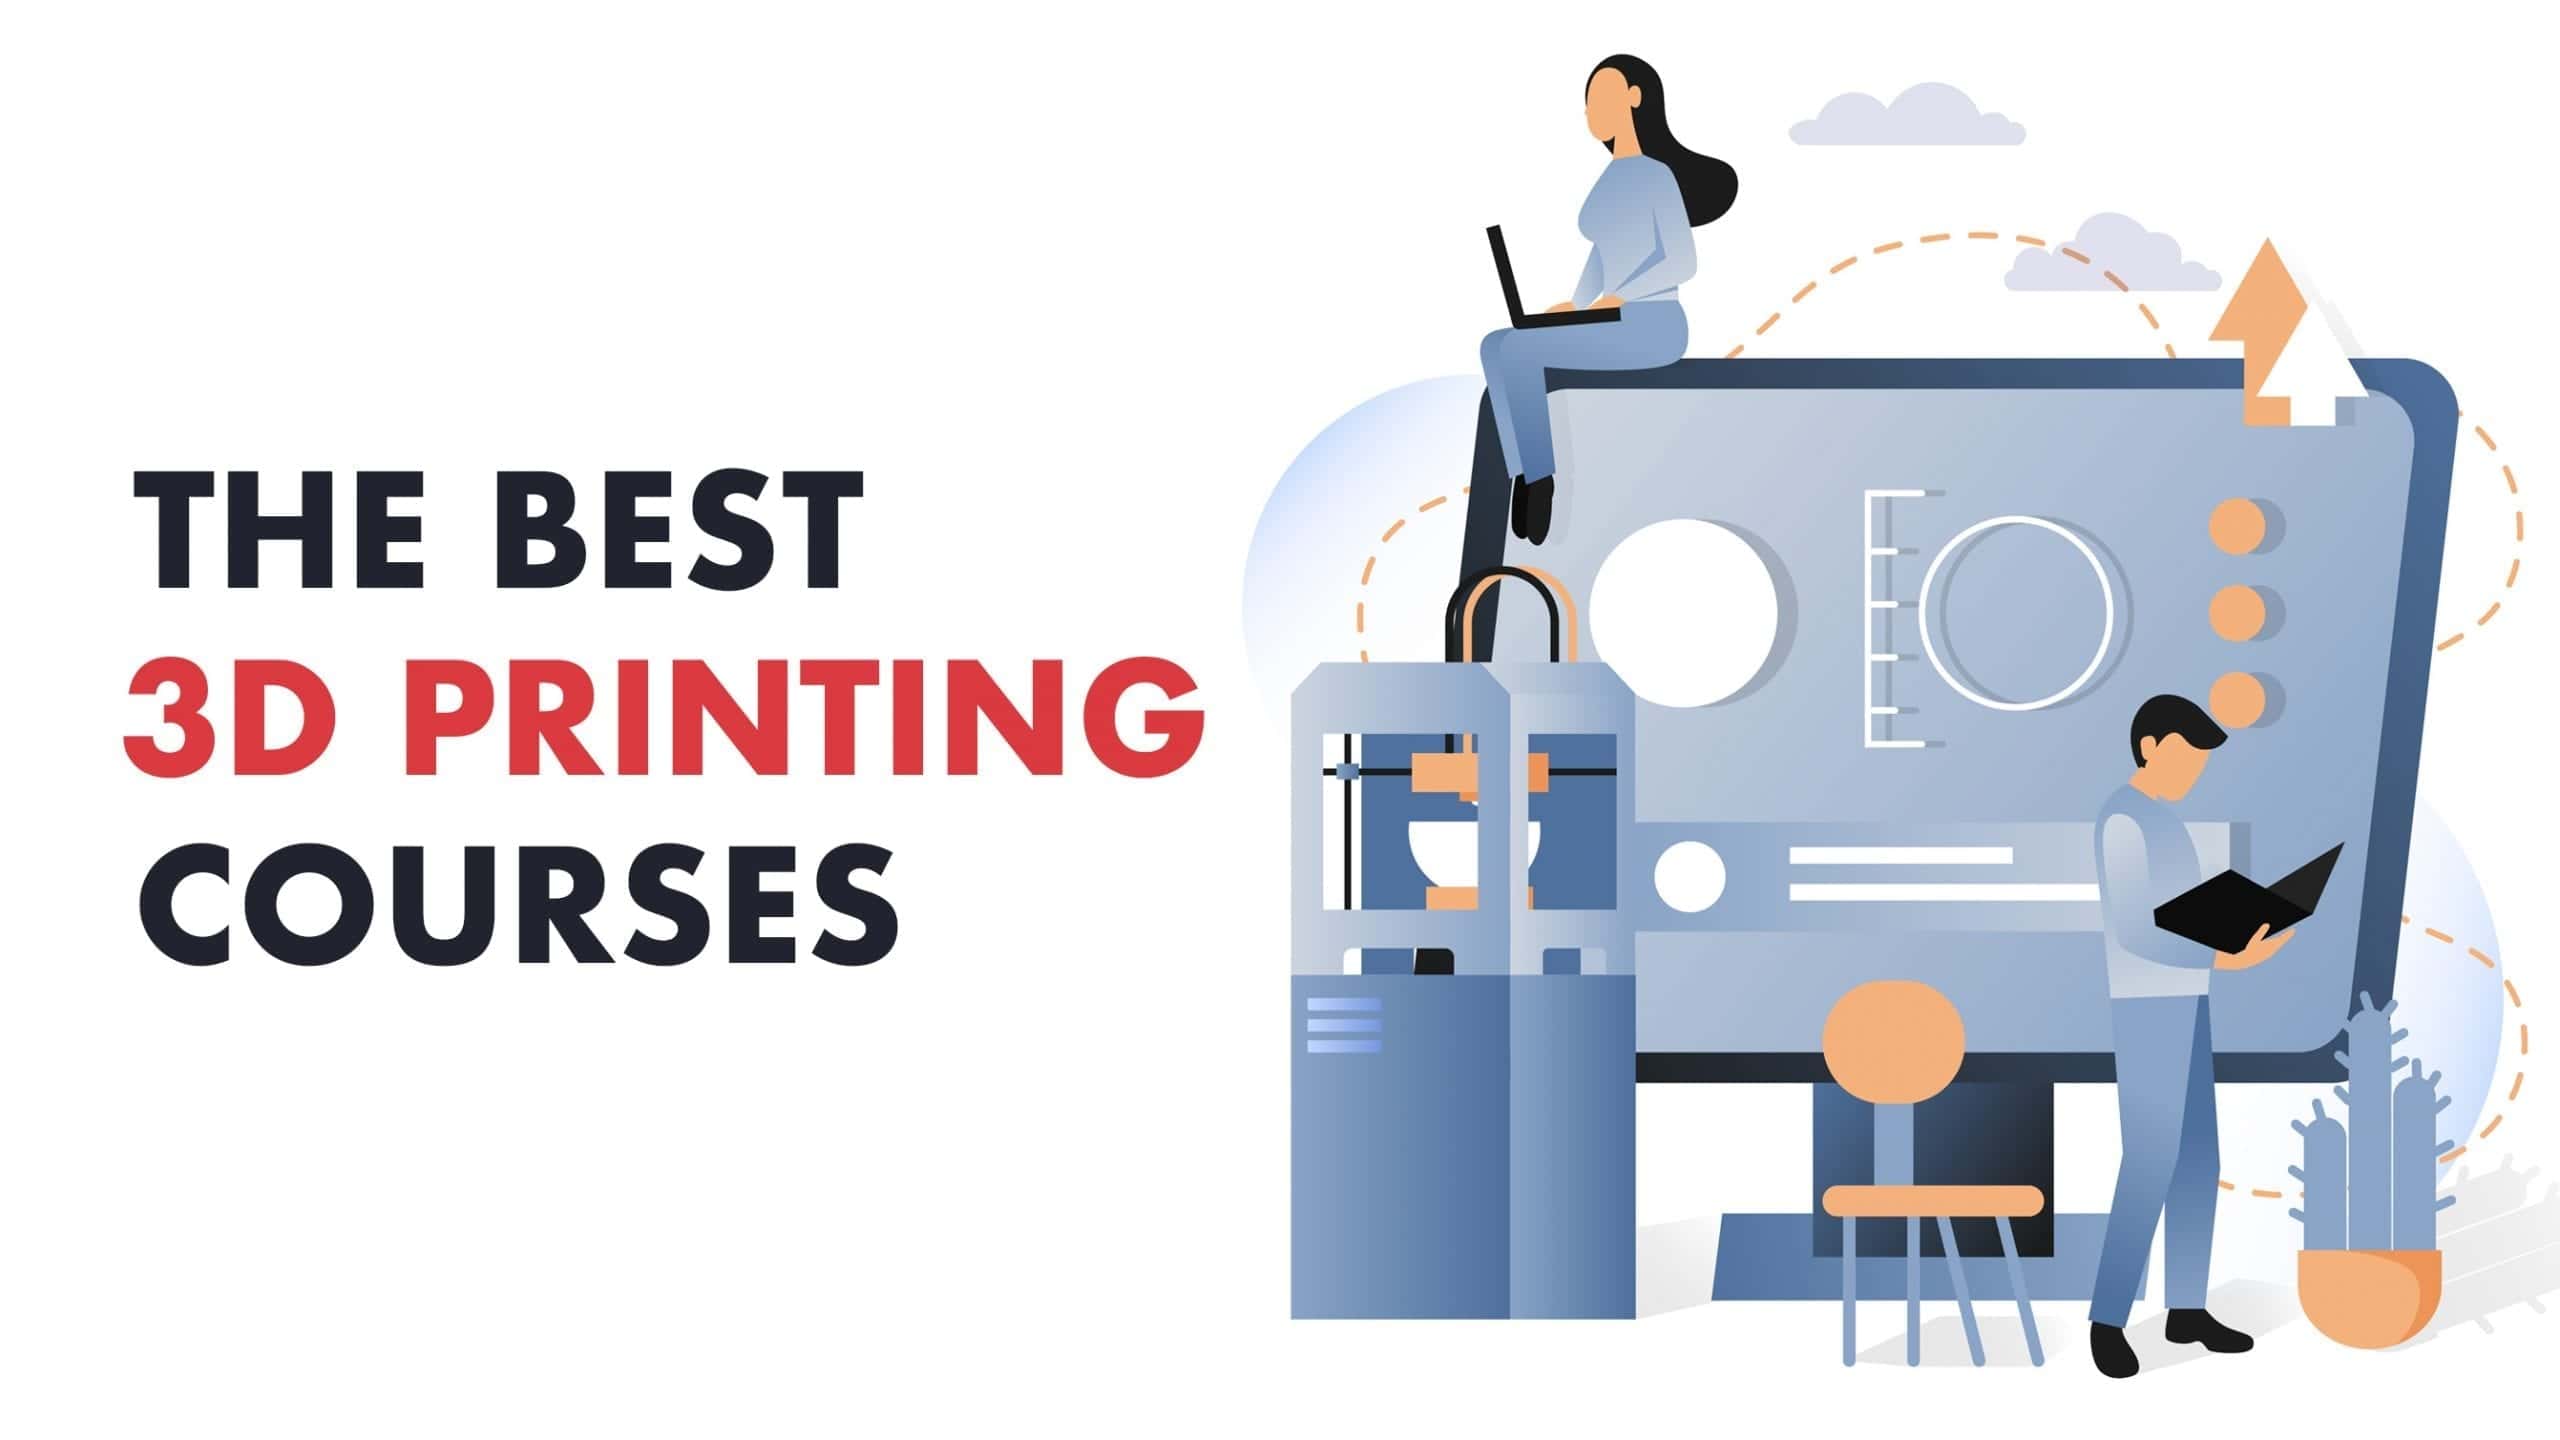 Sell an online 3D printing course